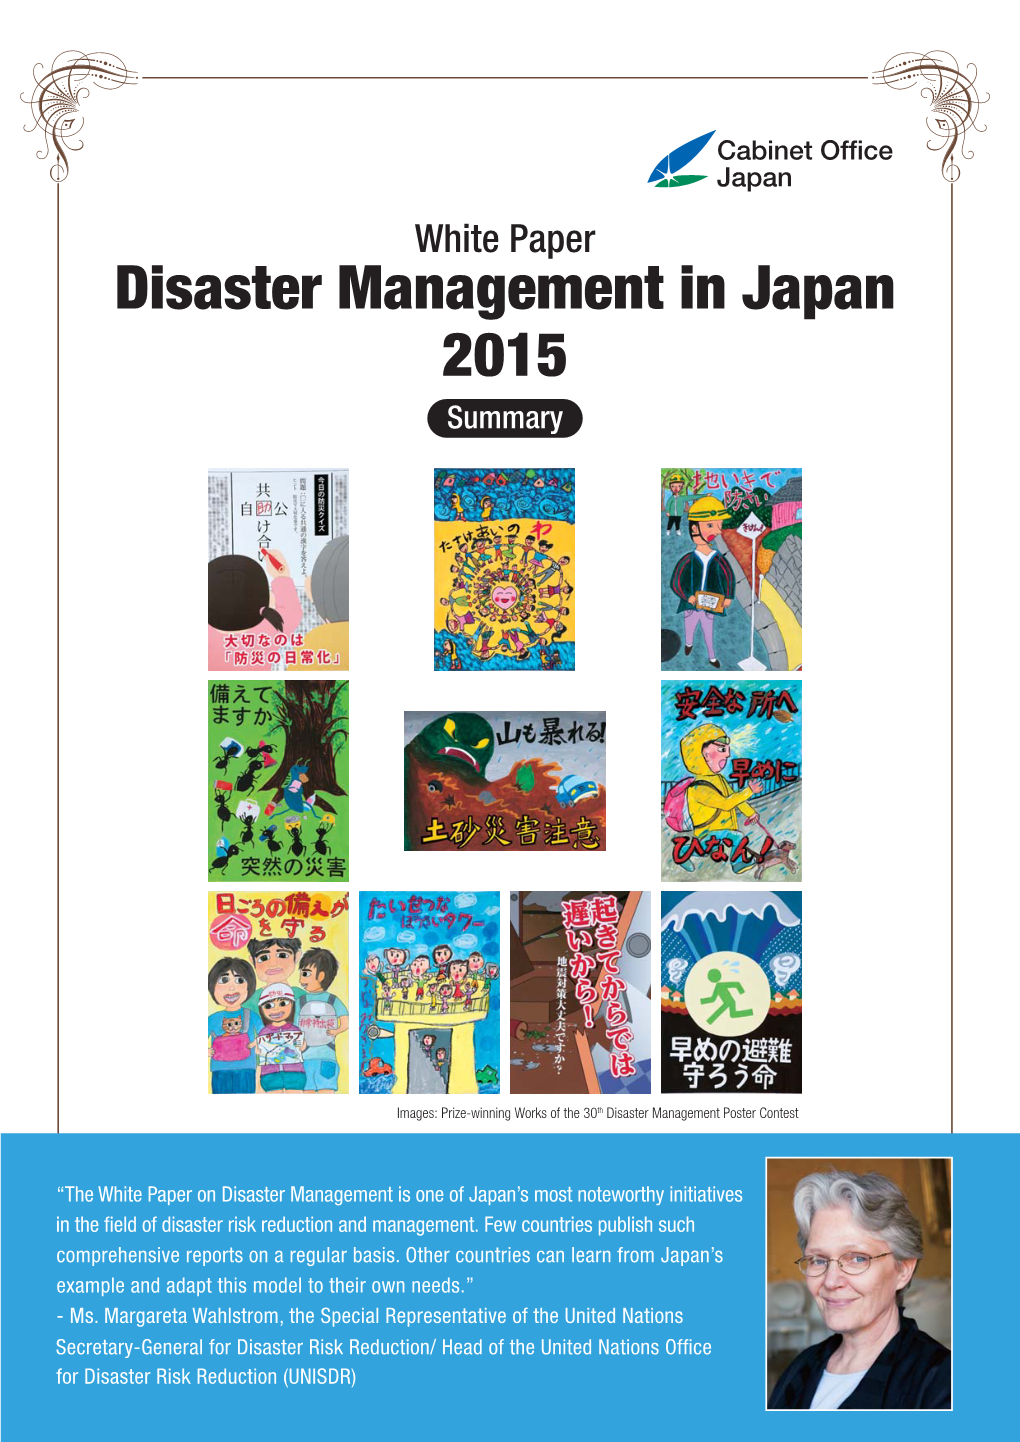 Disaster Management in Japan 2015 Summary